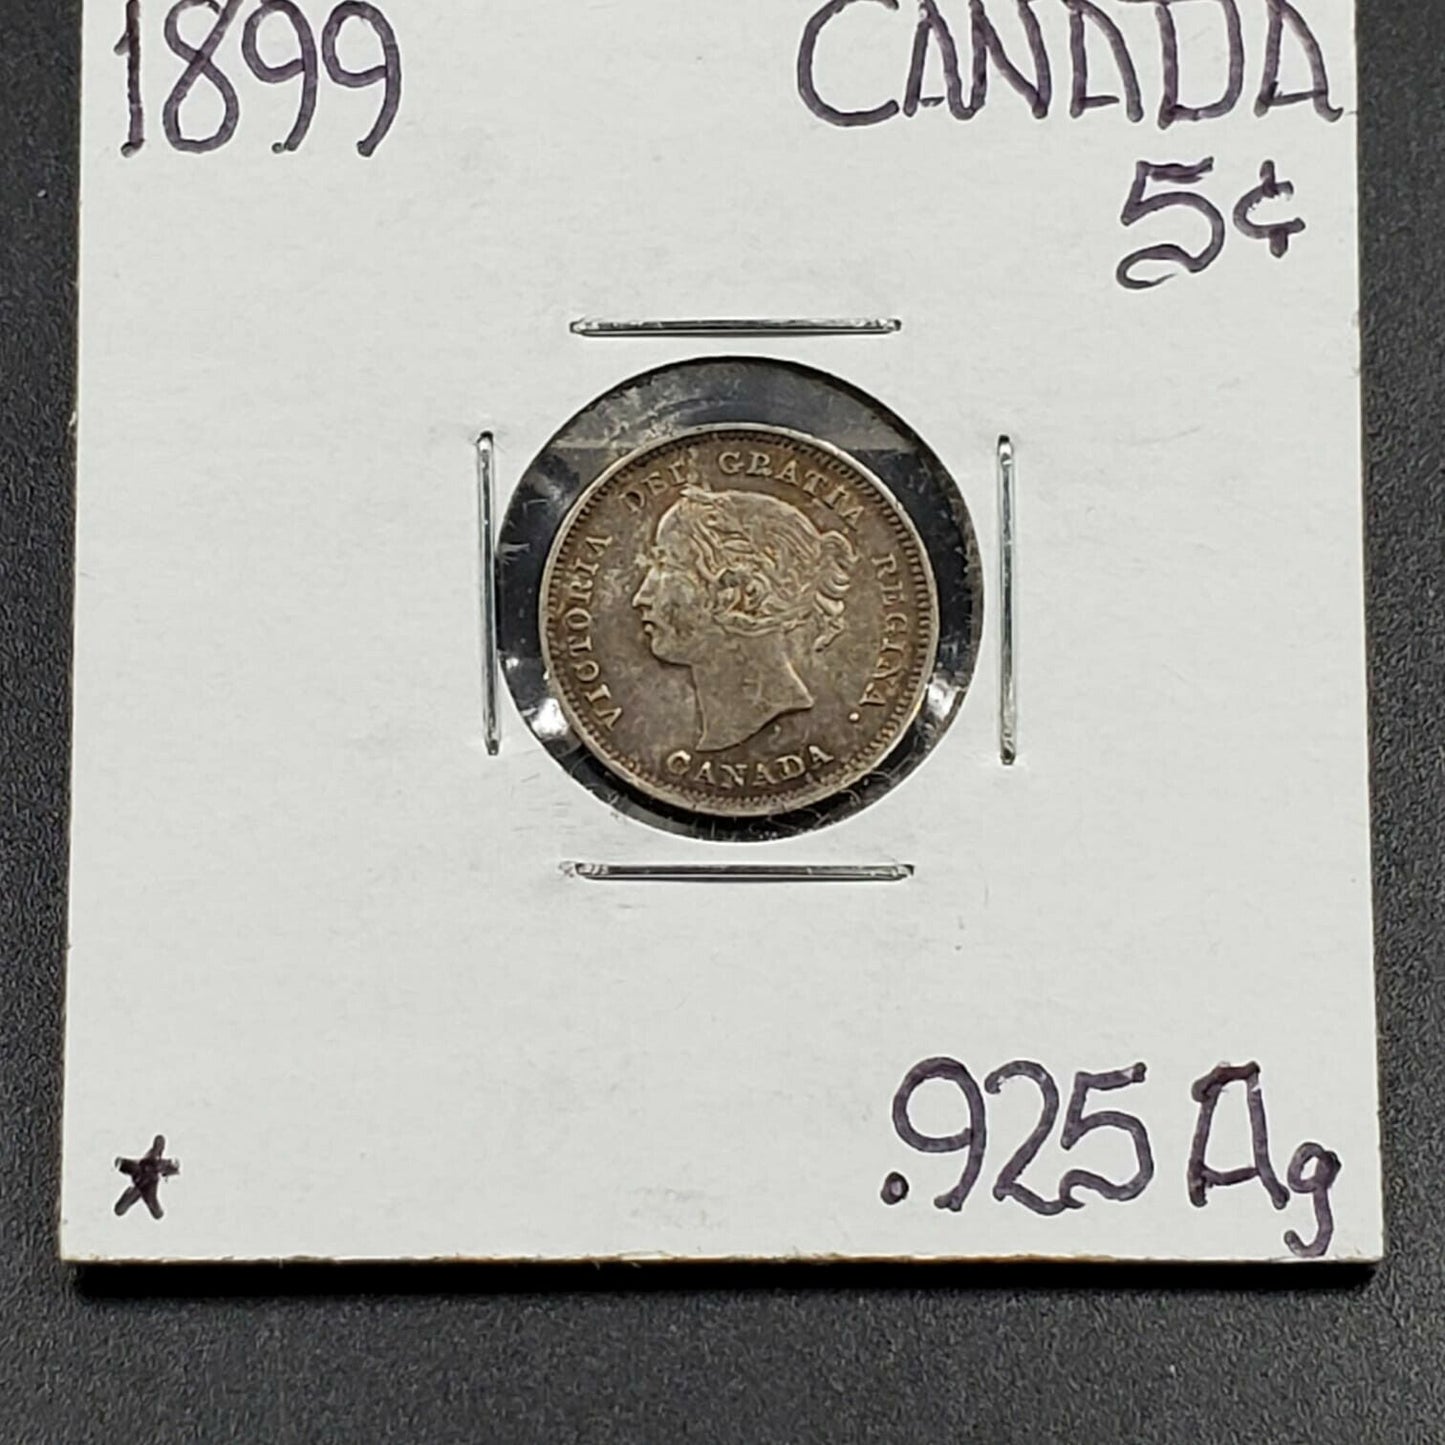 1899 5c Canada 5 Cents Silver Nickel Coin Choice XF Extra Fine Circulated